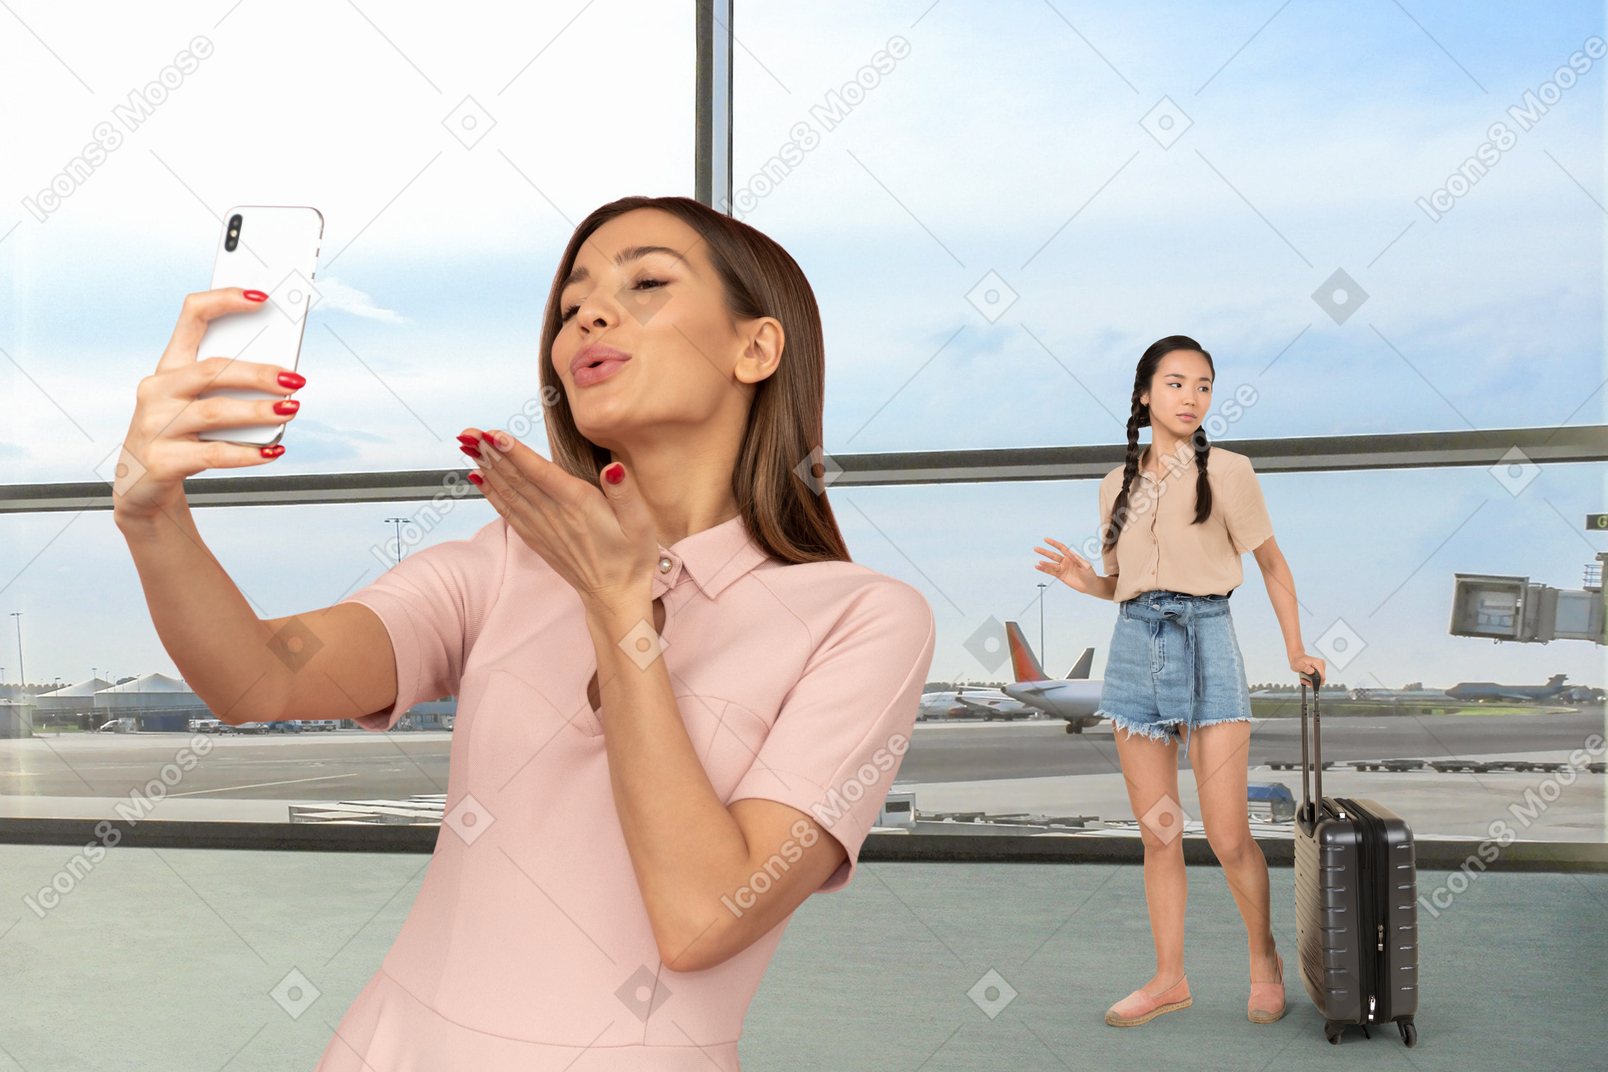 A woman taking selfies in an airport